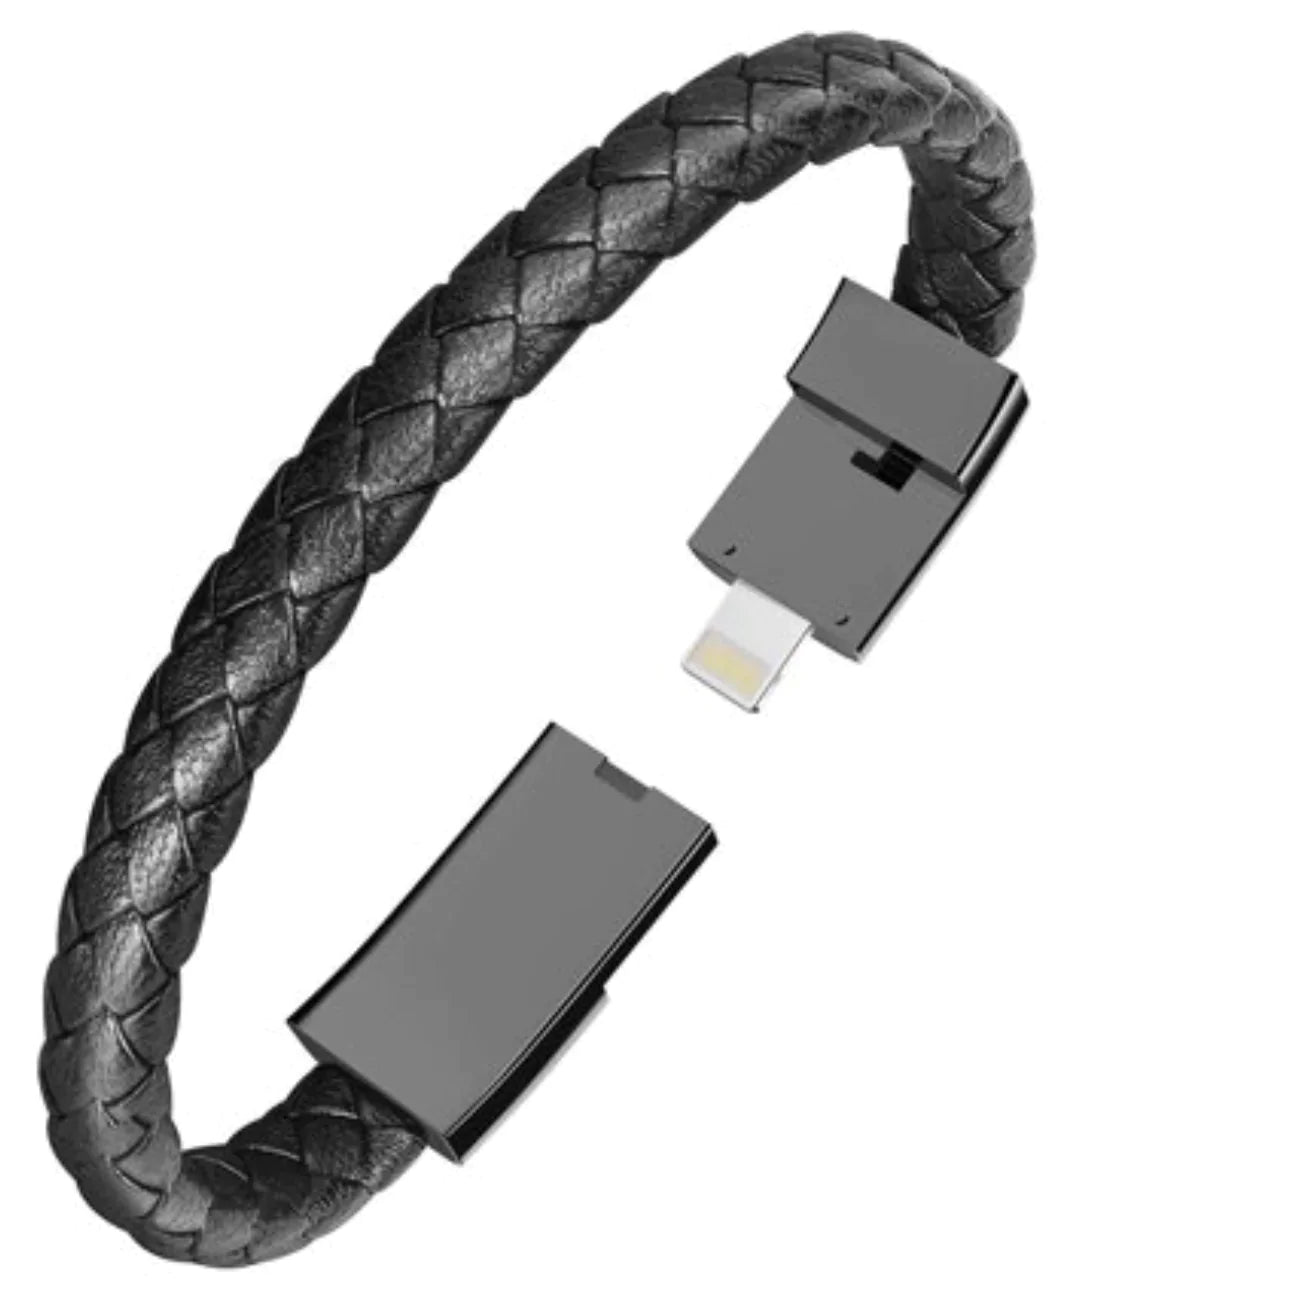 Vegan Leather Braided Leatherette Bracelet Portable USB Charging Cable Data  Cord Charger Charging Sync Cable USB C - Etsy